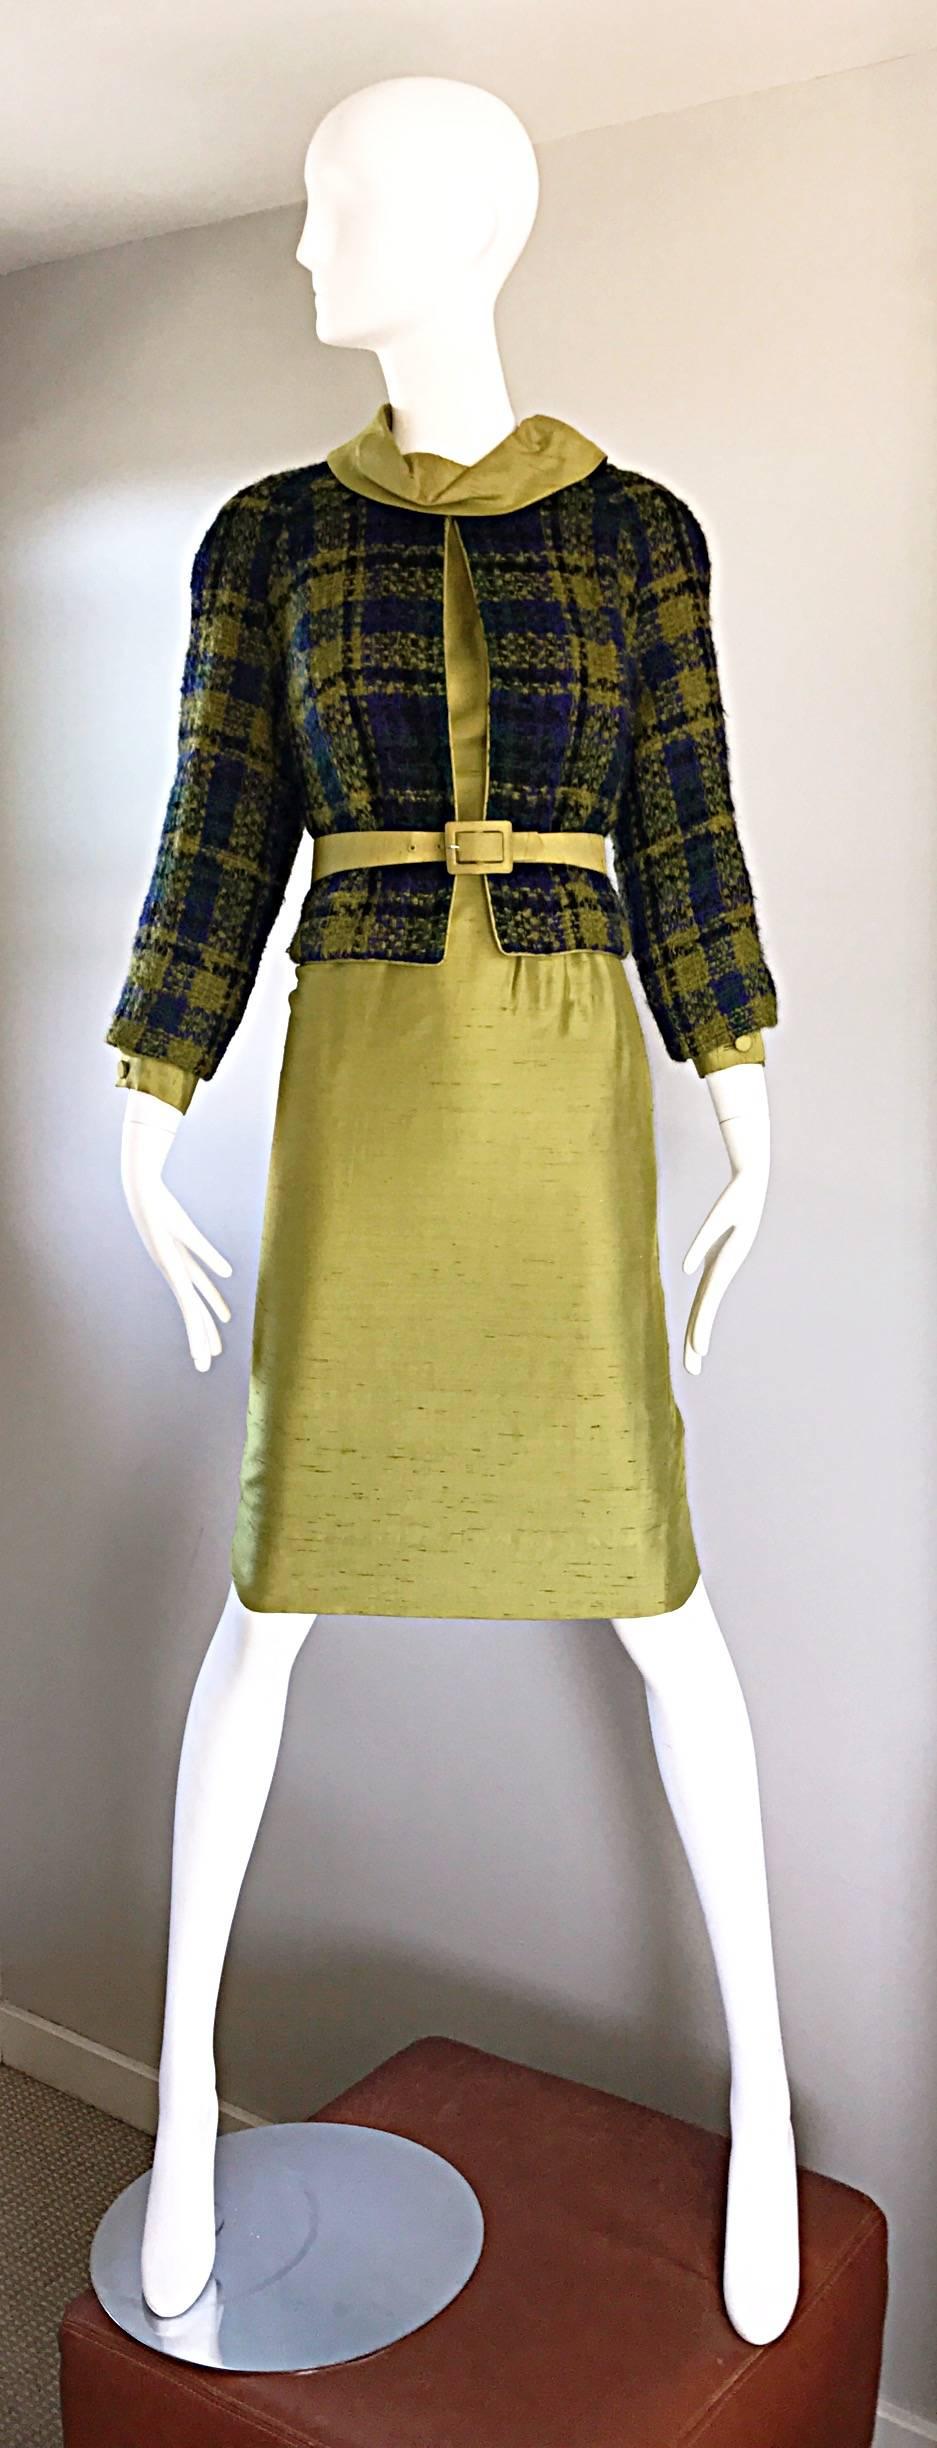 Chic Jackie O style vintage I MAGNIN chartreuse green raw silk three piece dress set! Features a long sleeve silk shantung shift dress. High collar, with button cuffs at sleeves. Elastic waistband can accomodate a variety of sizes. Blue and